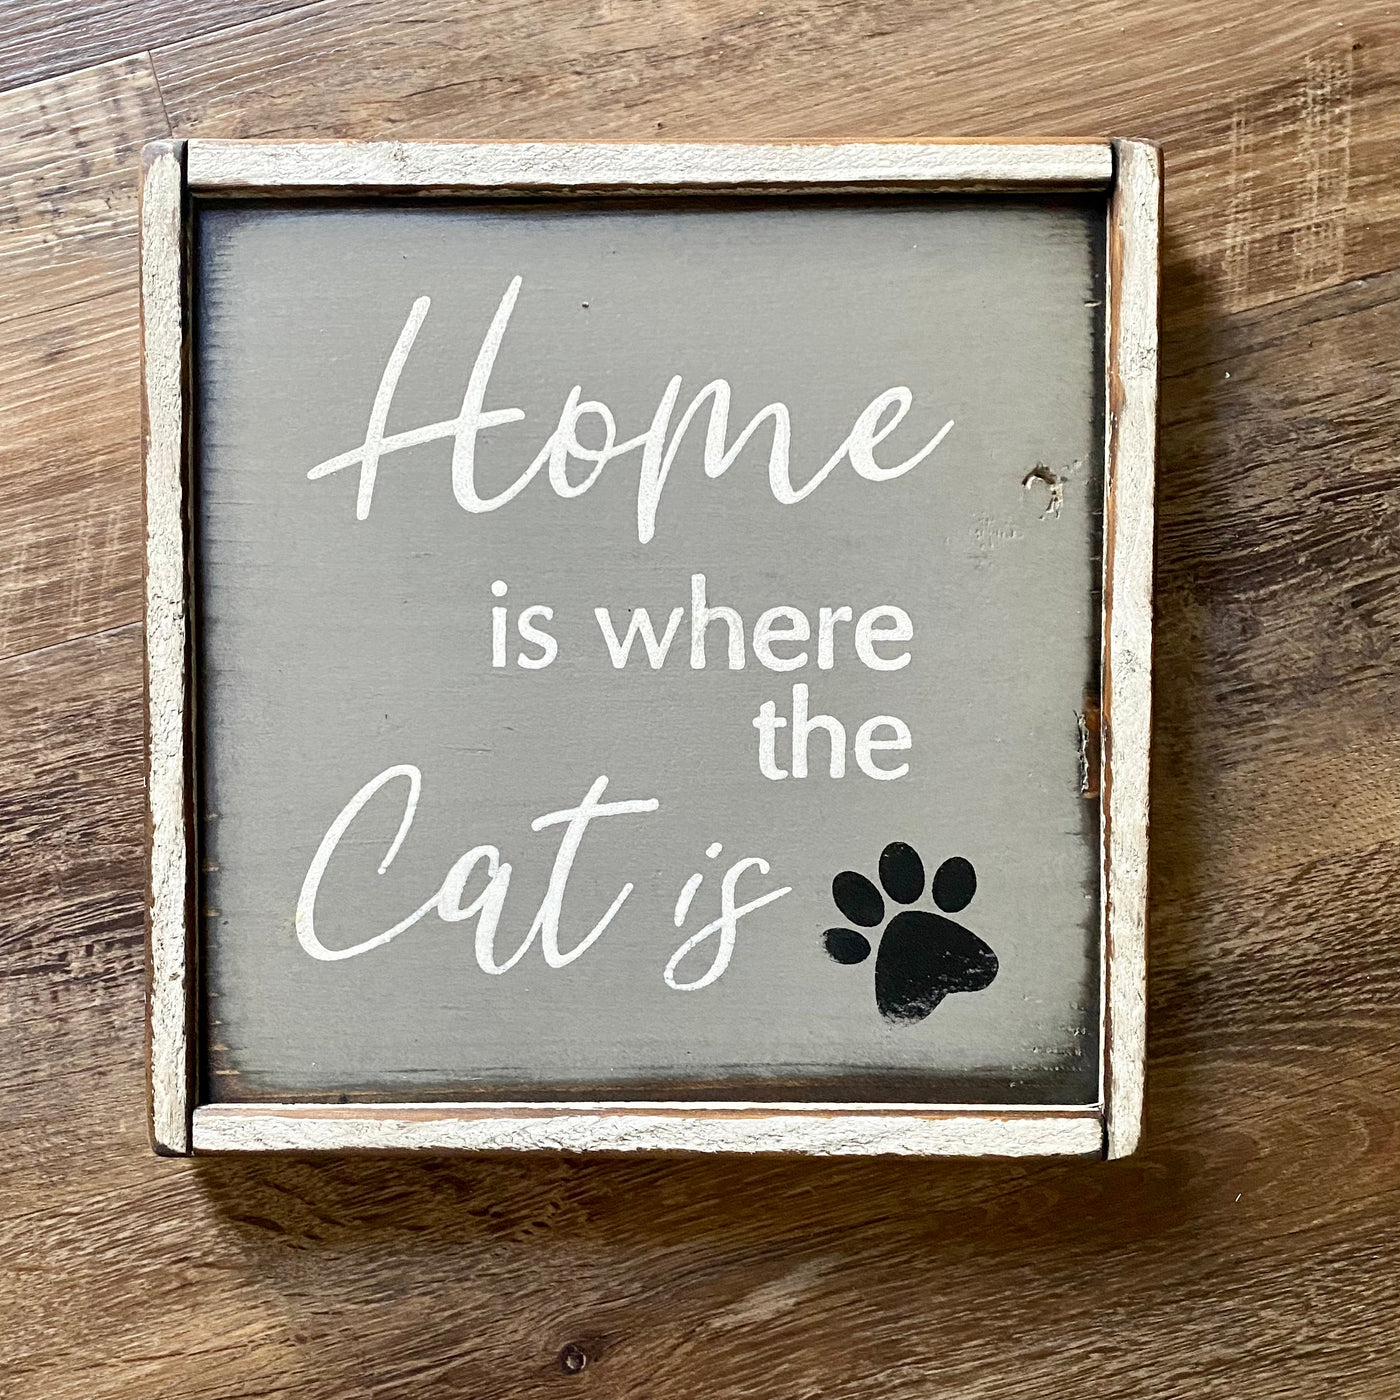 10x10 white framed wood sign reads home is where the cat is. Grey background with white lettering and a black pawprint accent.